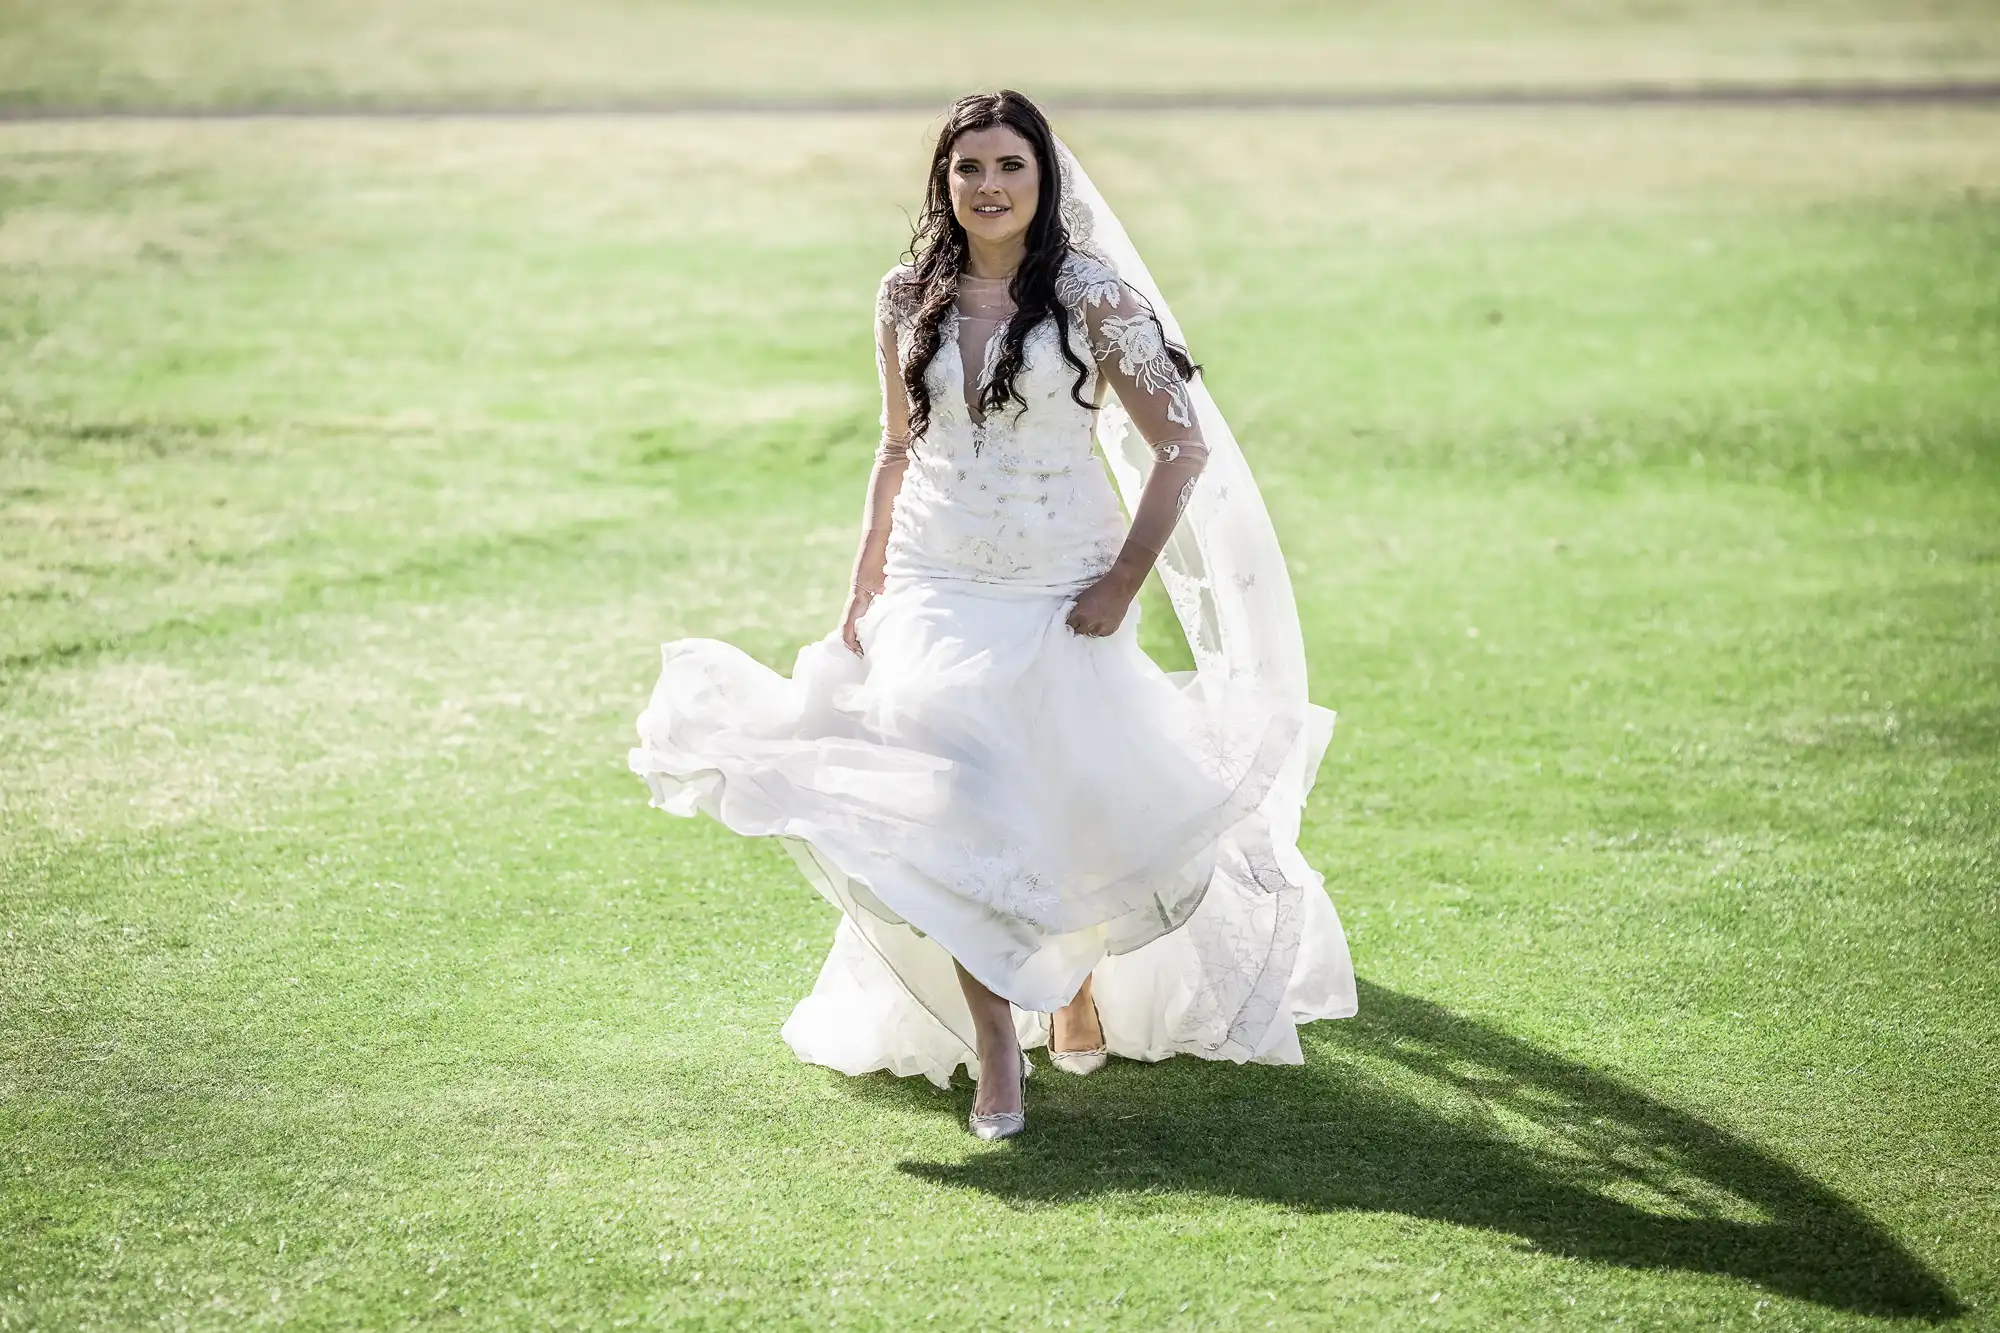 A bride in a flowing white dress walking on a grassy field, her dress and hair moving gently with her stride.